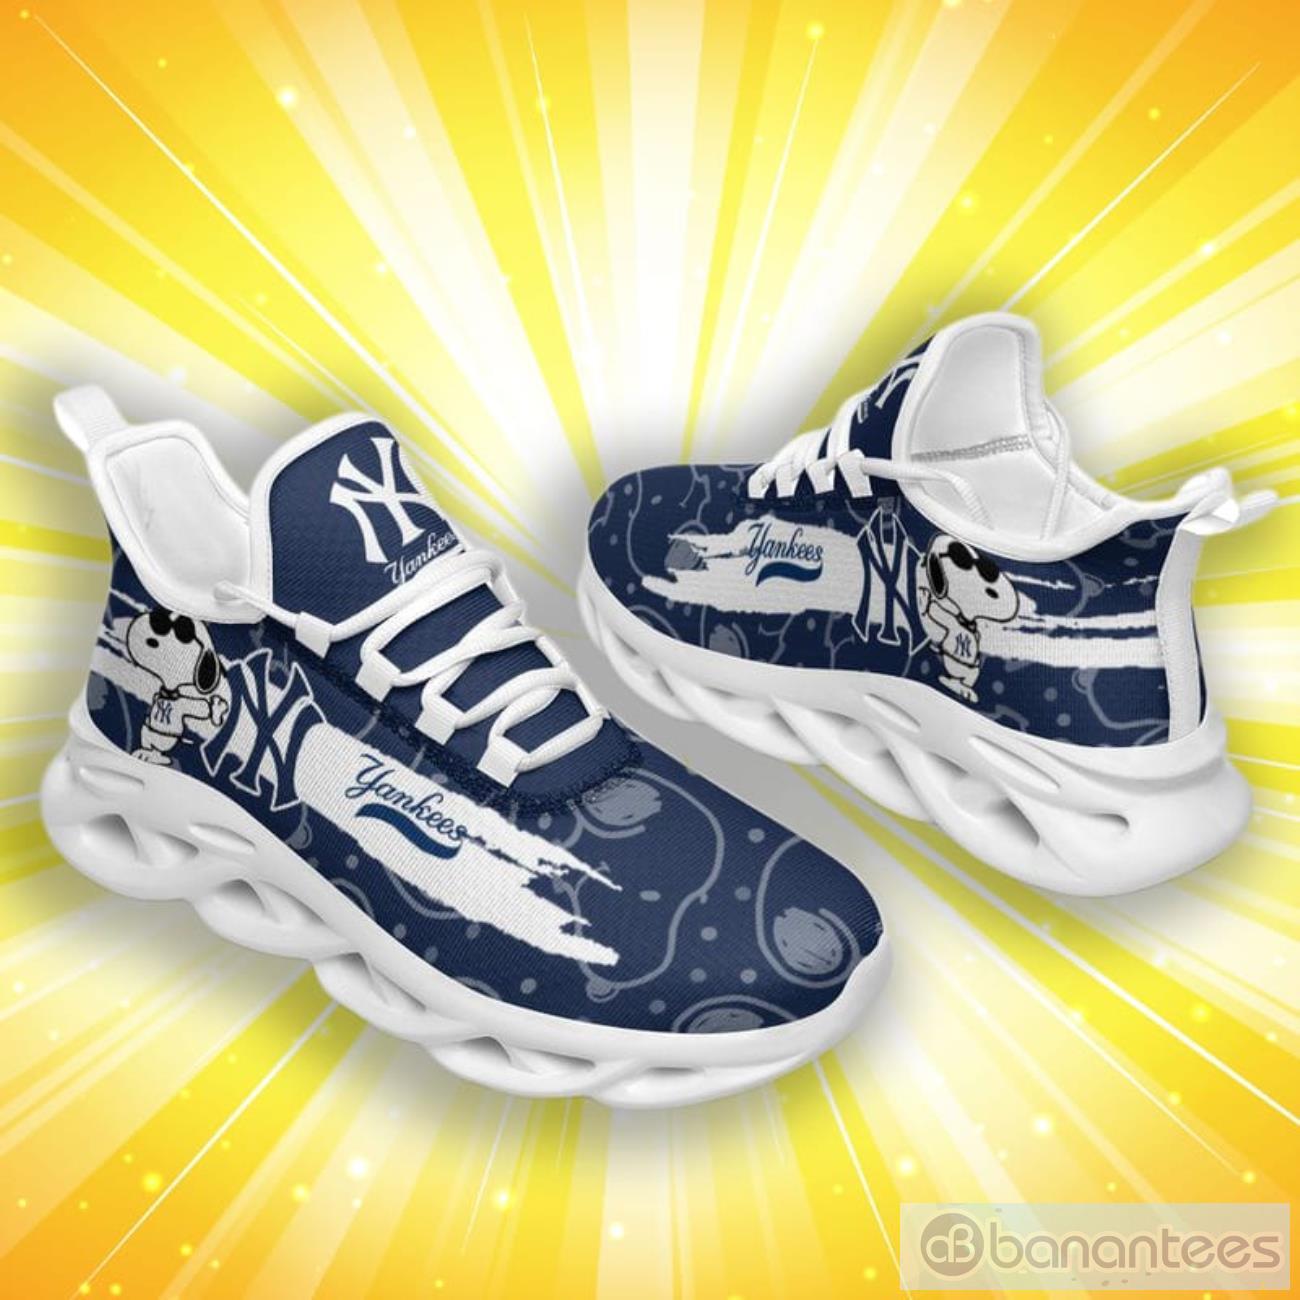 MLB New York Yankees Snoopy Exclusive Max Soul Shoes - Banantees